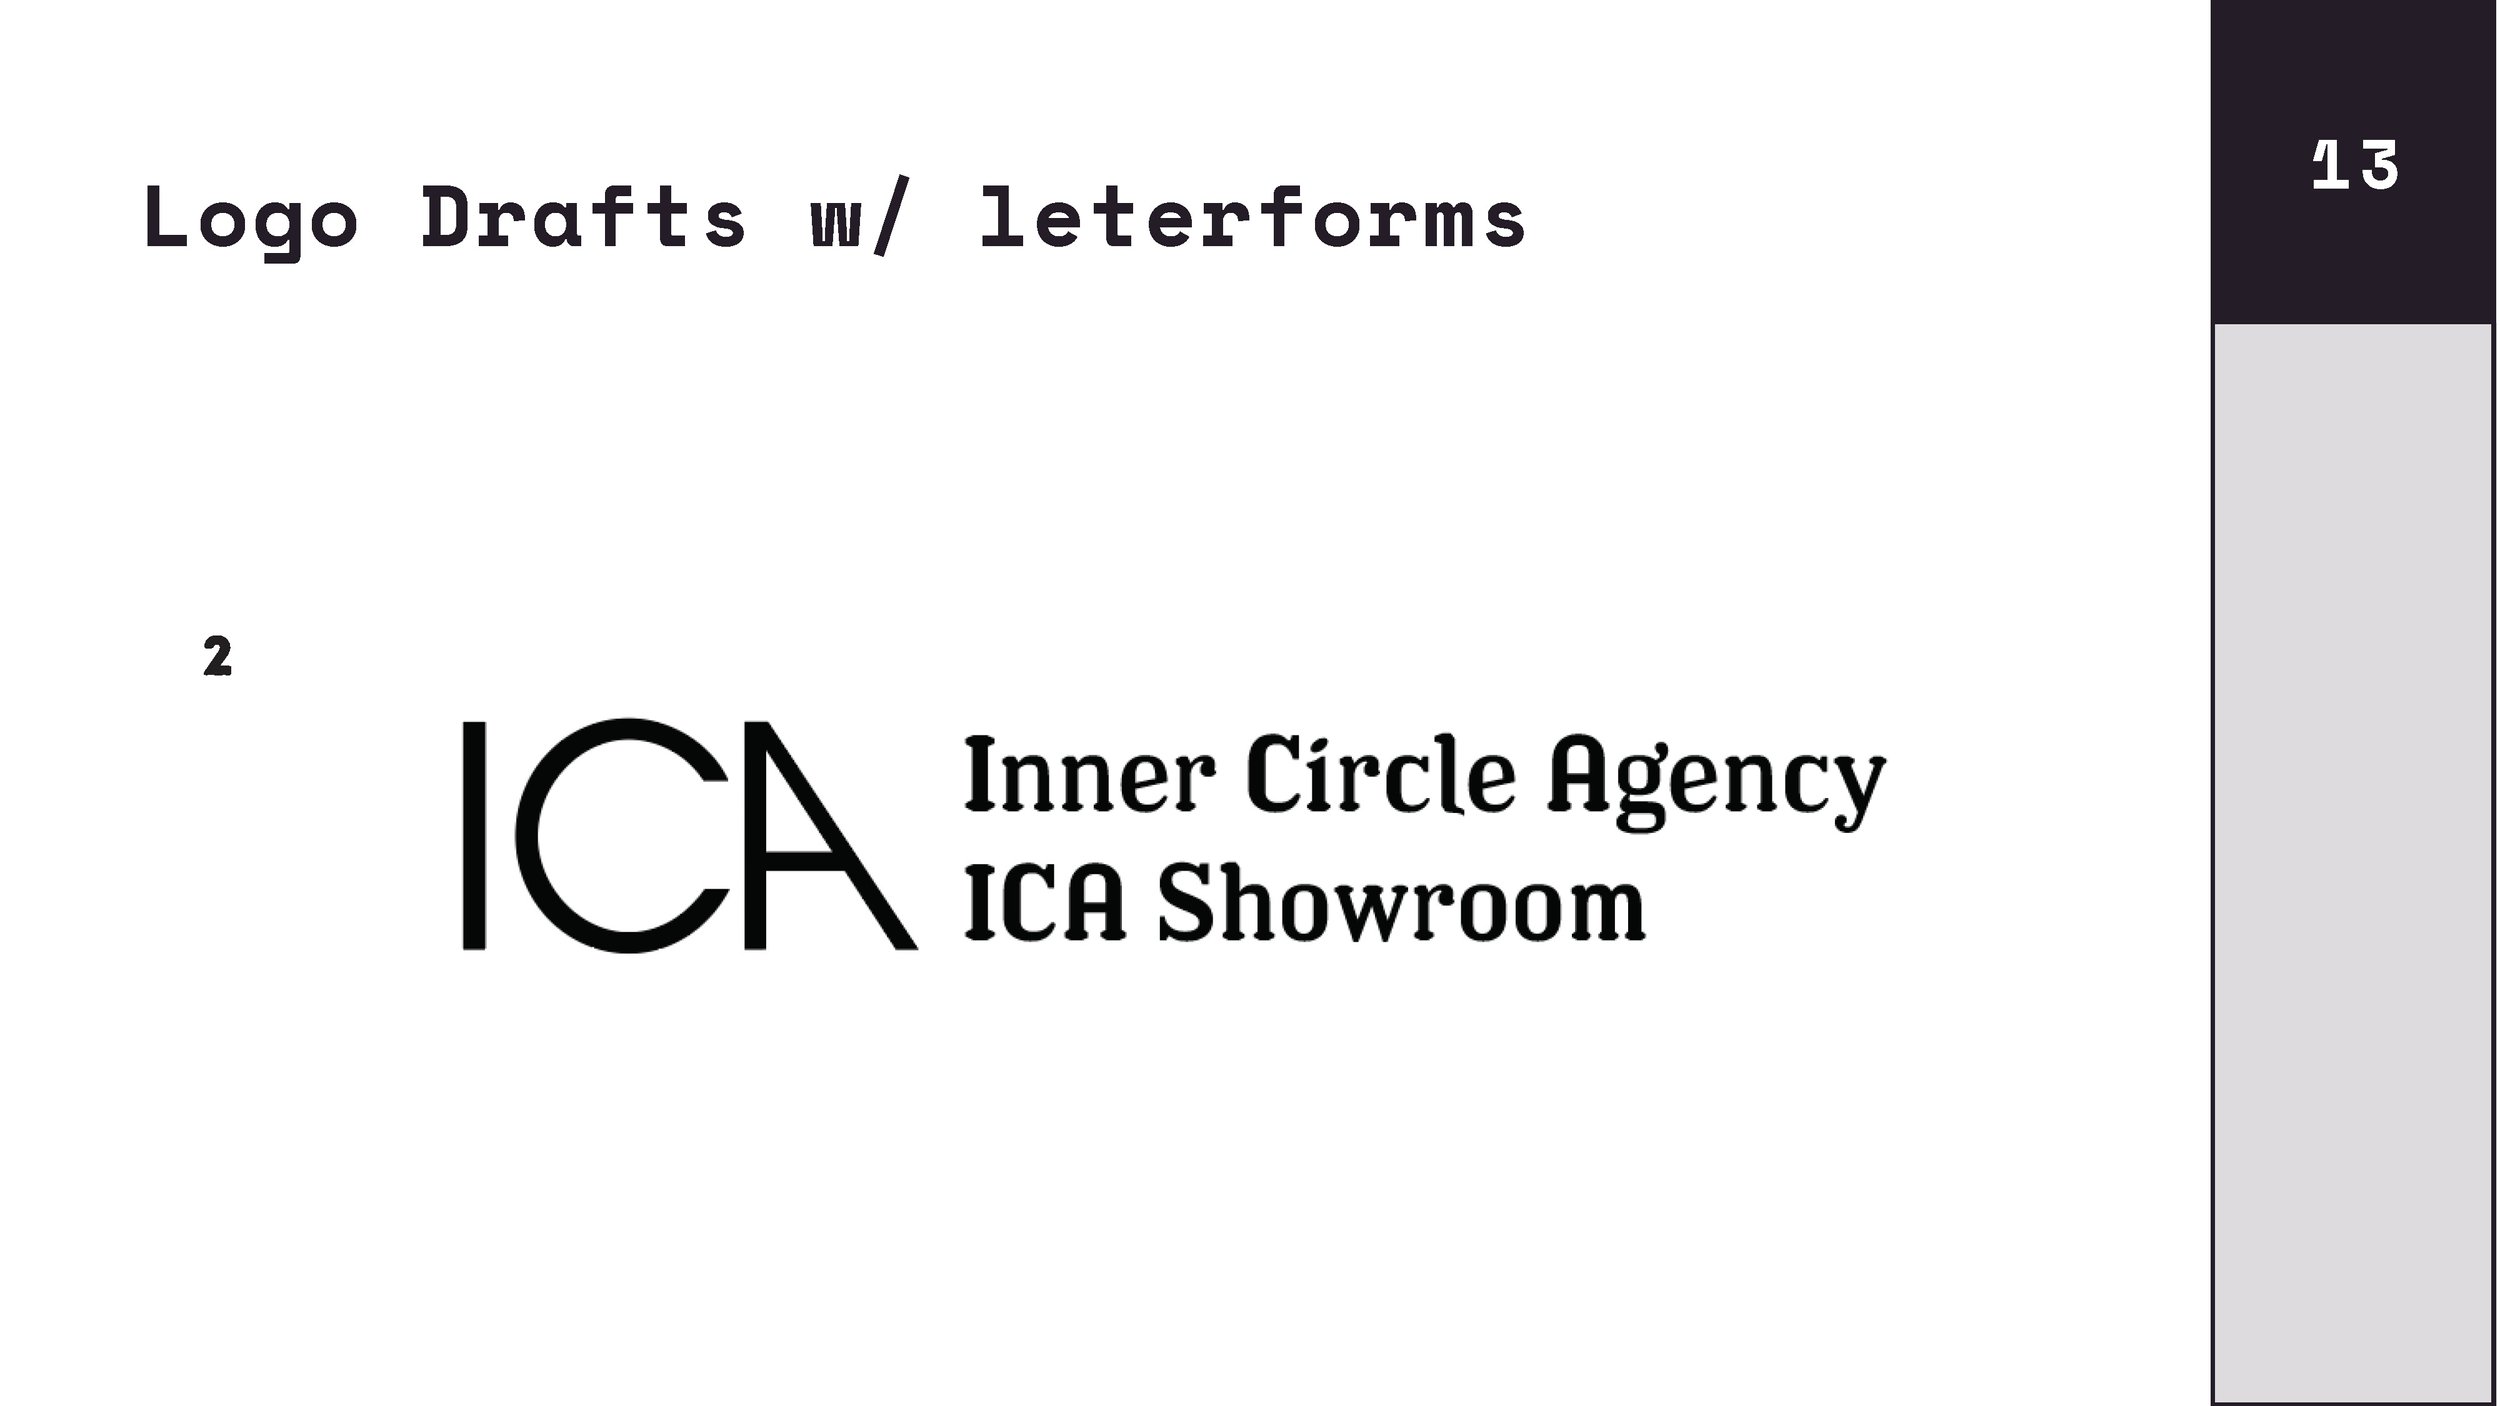 ICA _Page_13.jpg